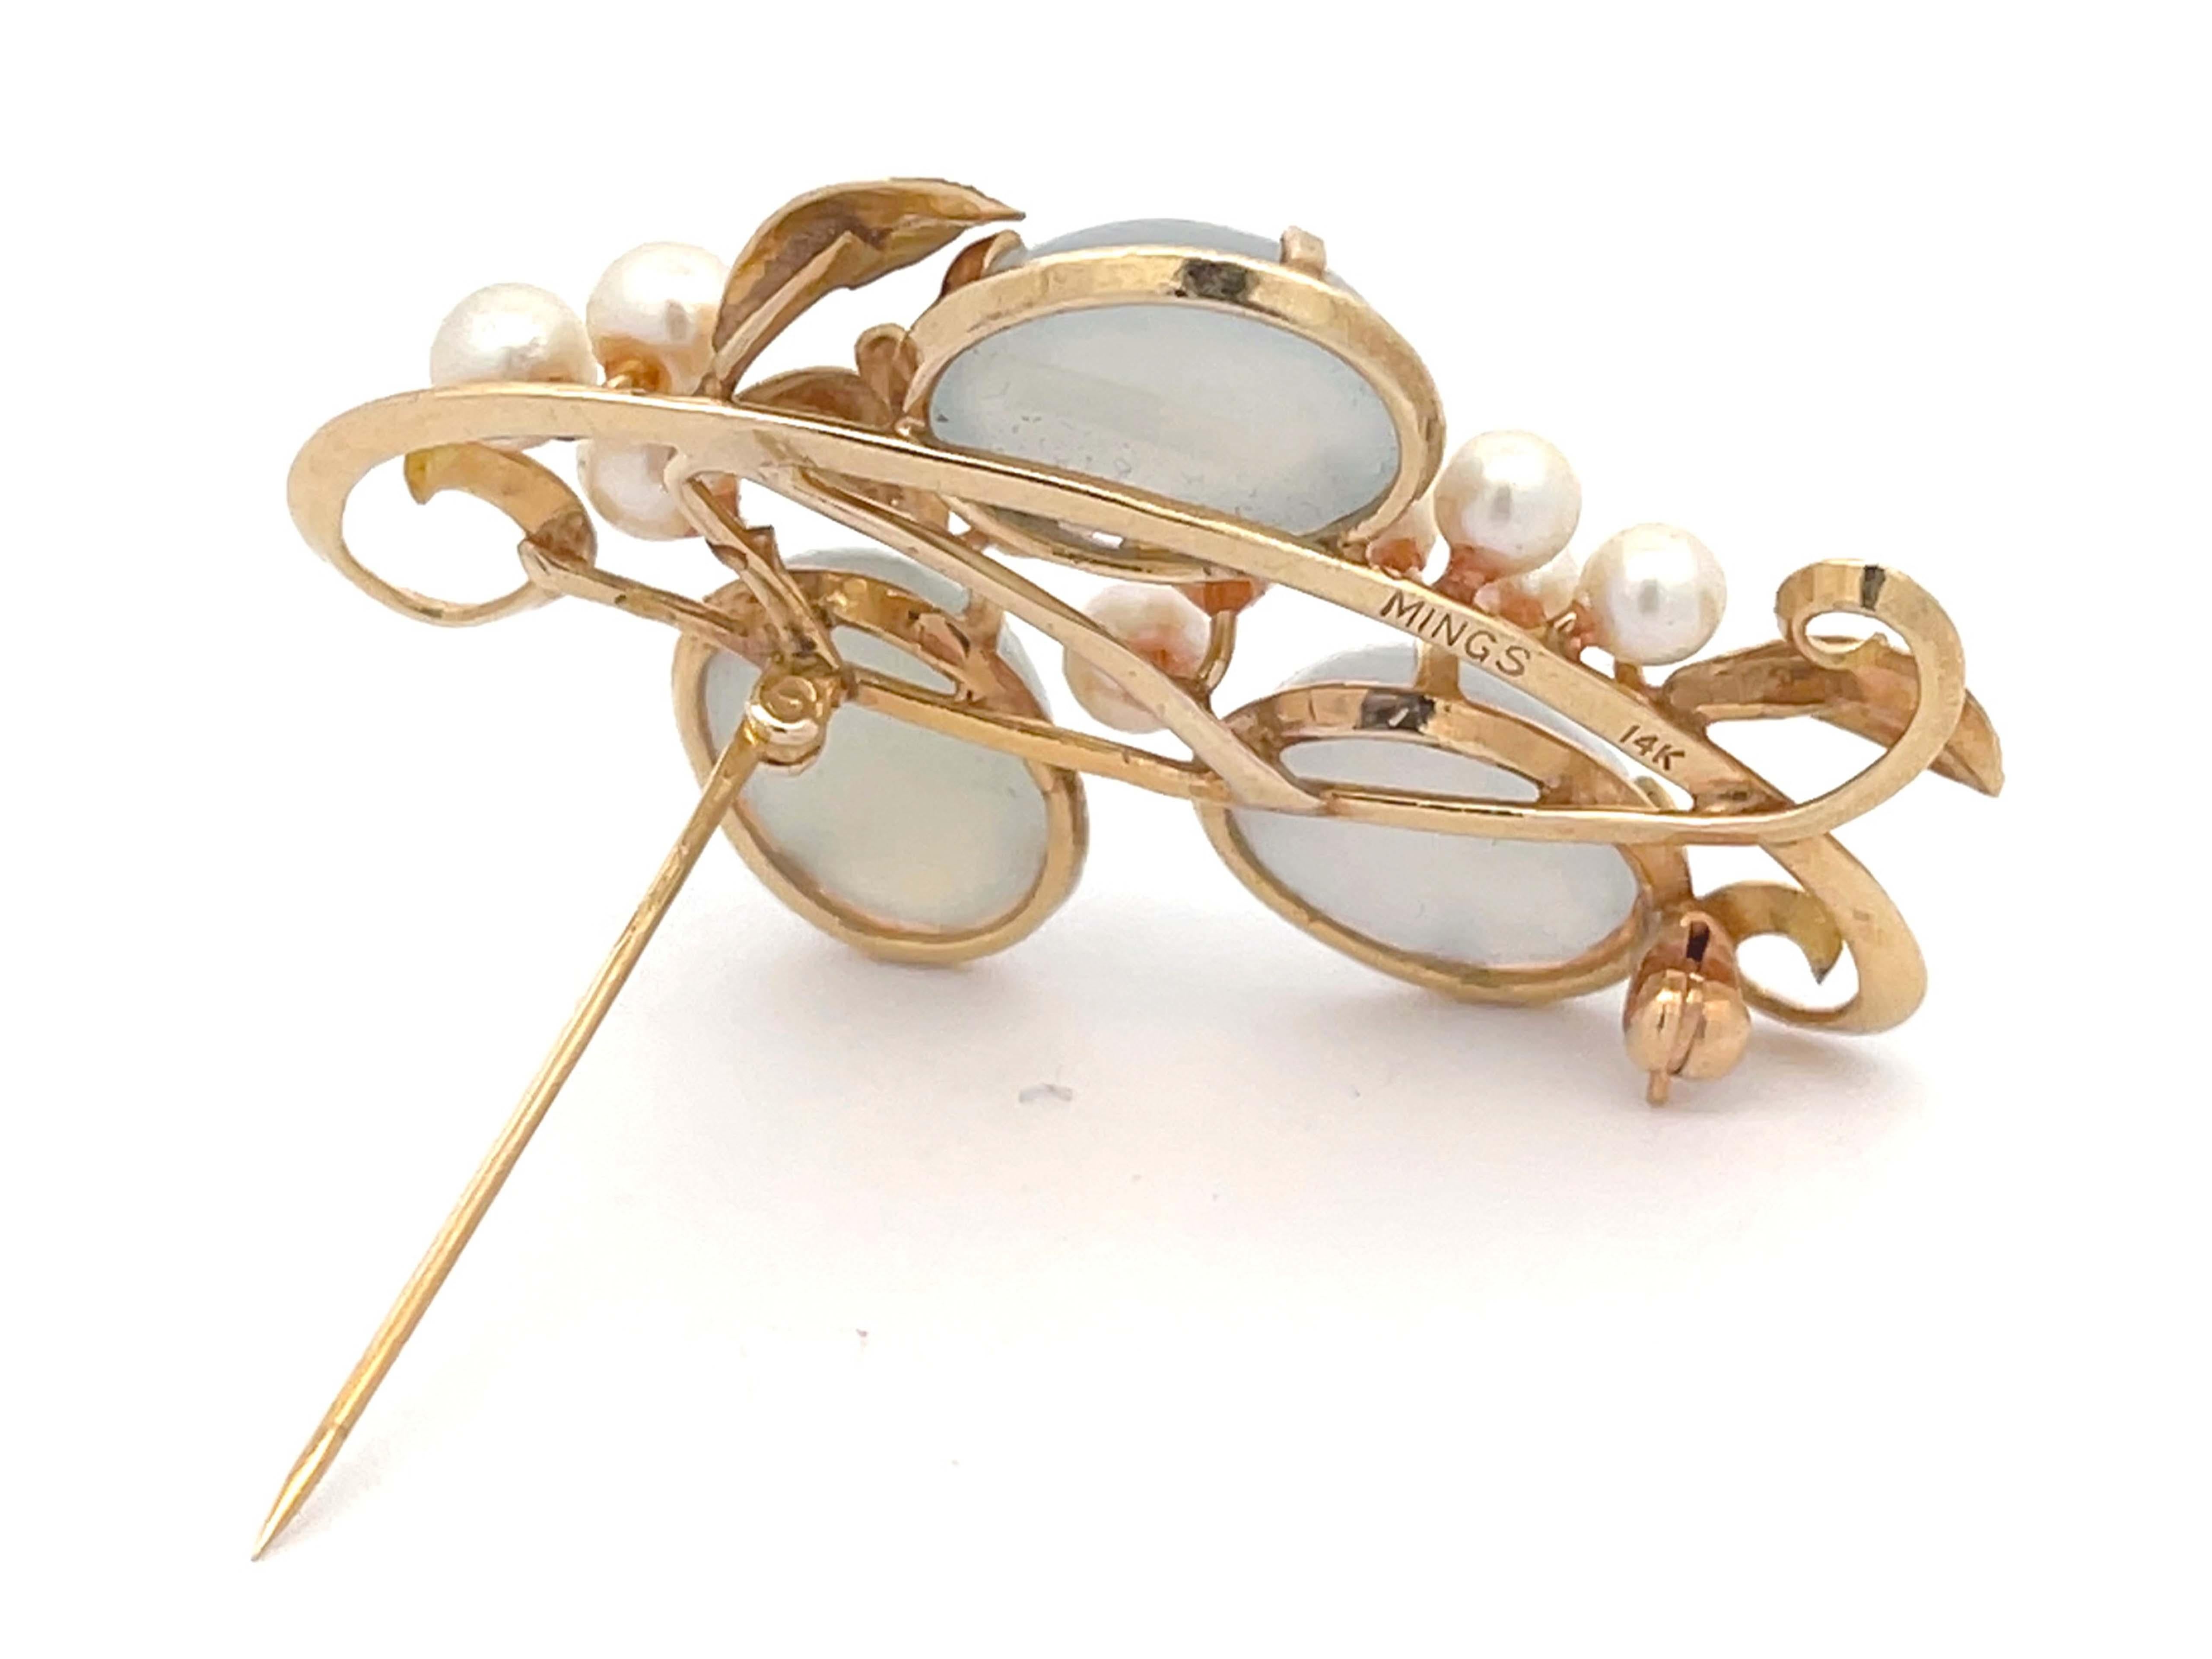 Mings Pale Oval Jade and Pearls Branch Brooch in 14k Yellow Gold In Excellent Condition For Sale In Honolulu, HI